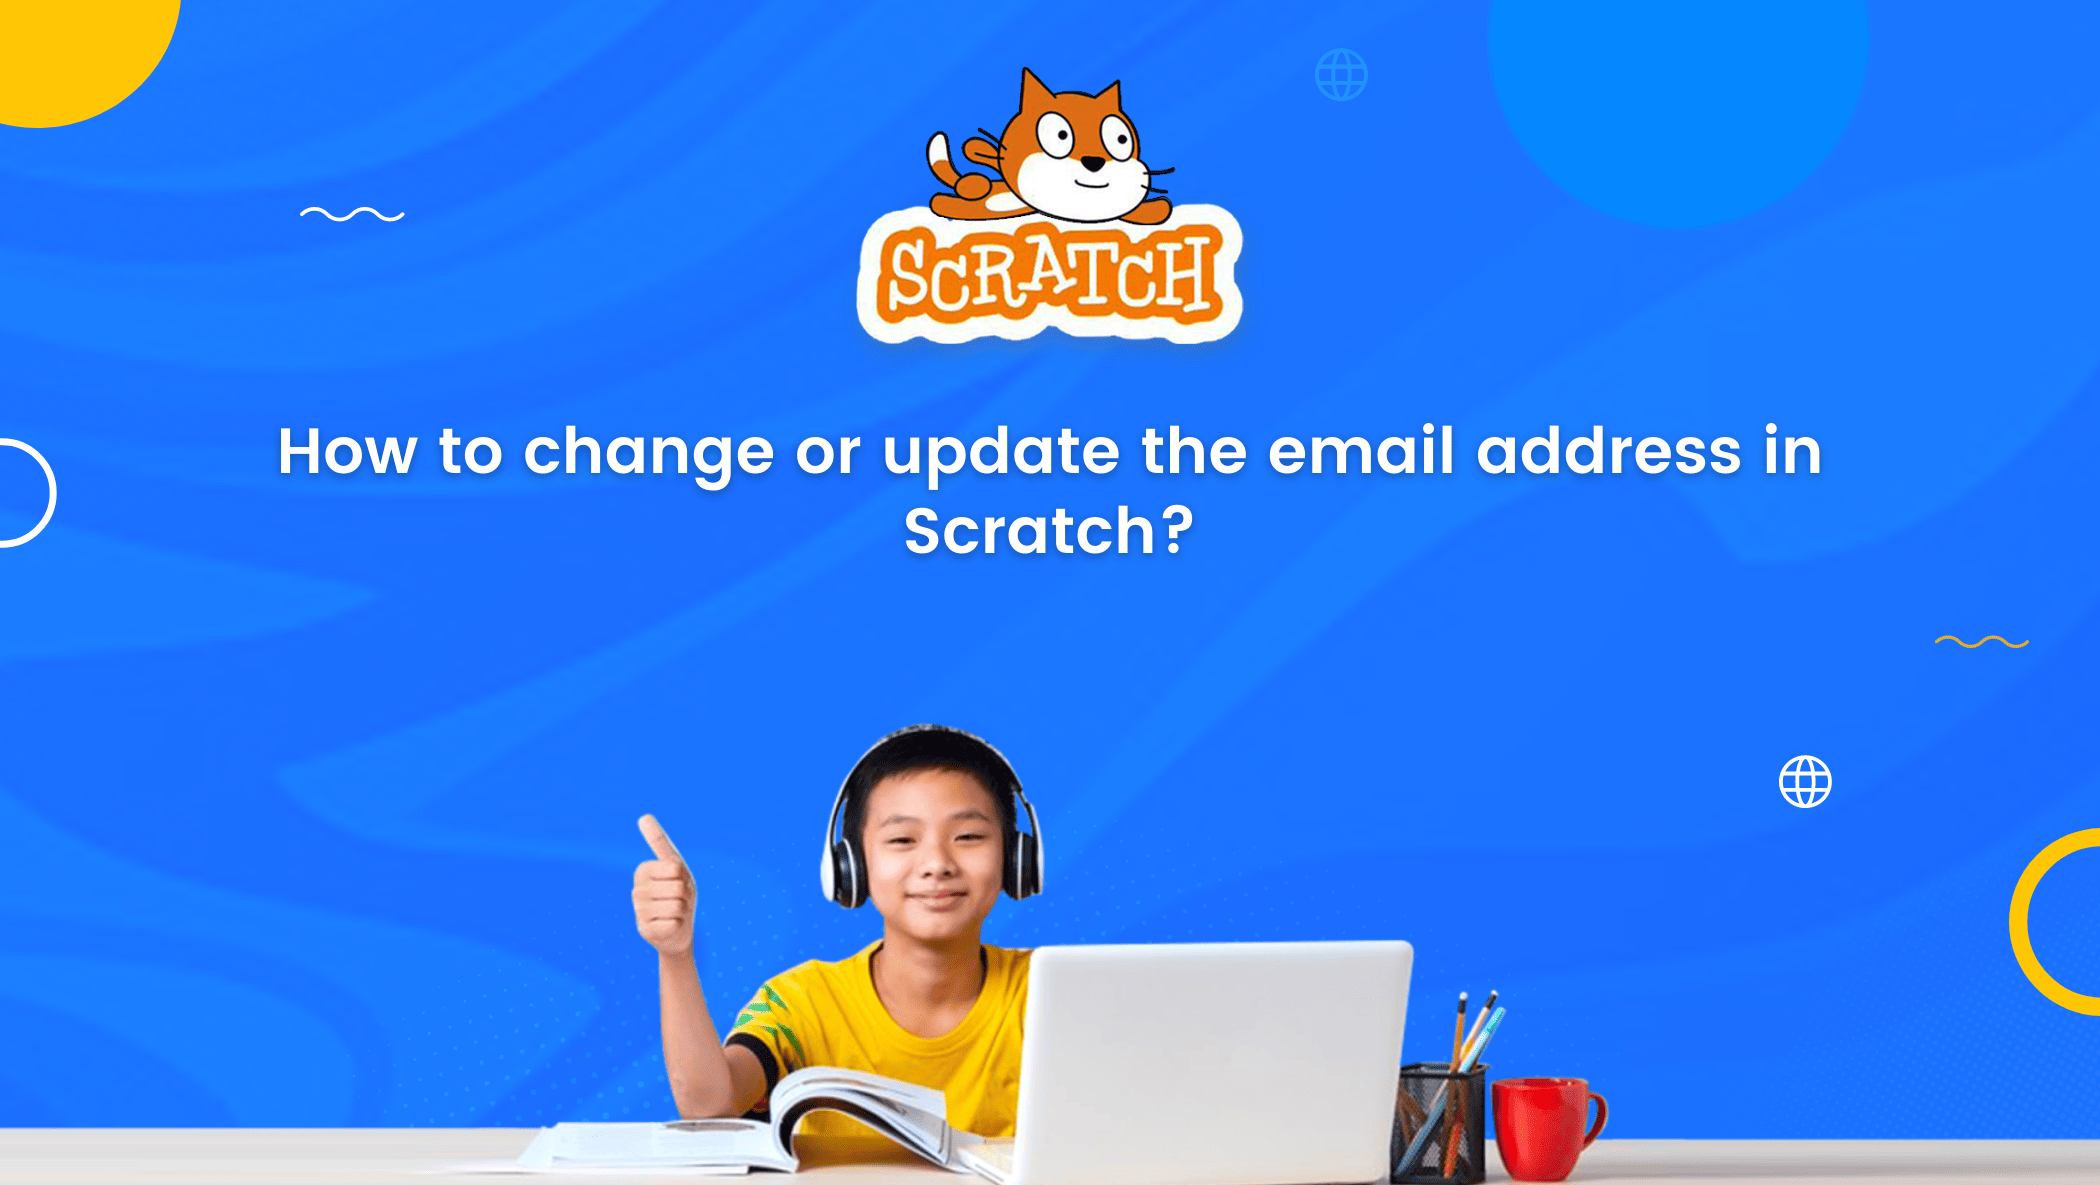 How to change or update email address in Scratch